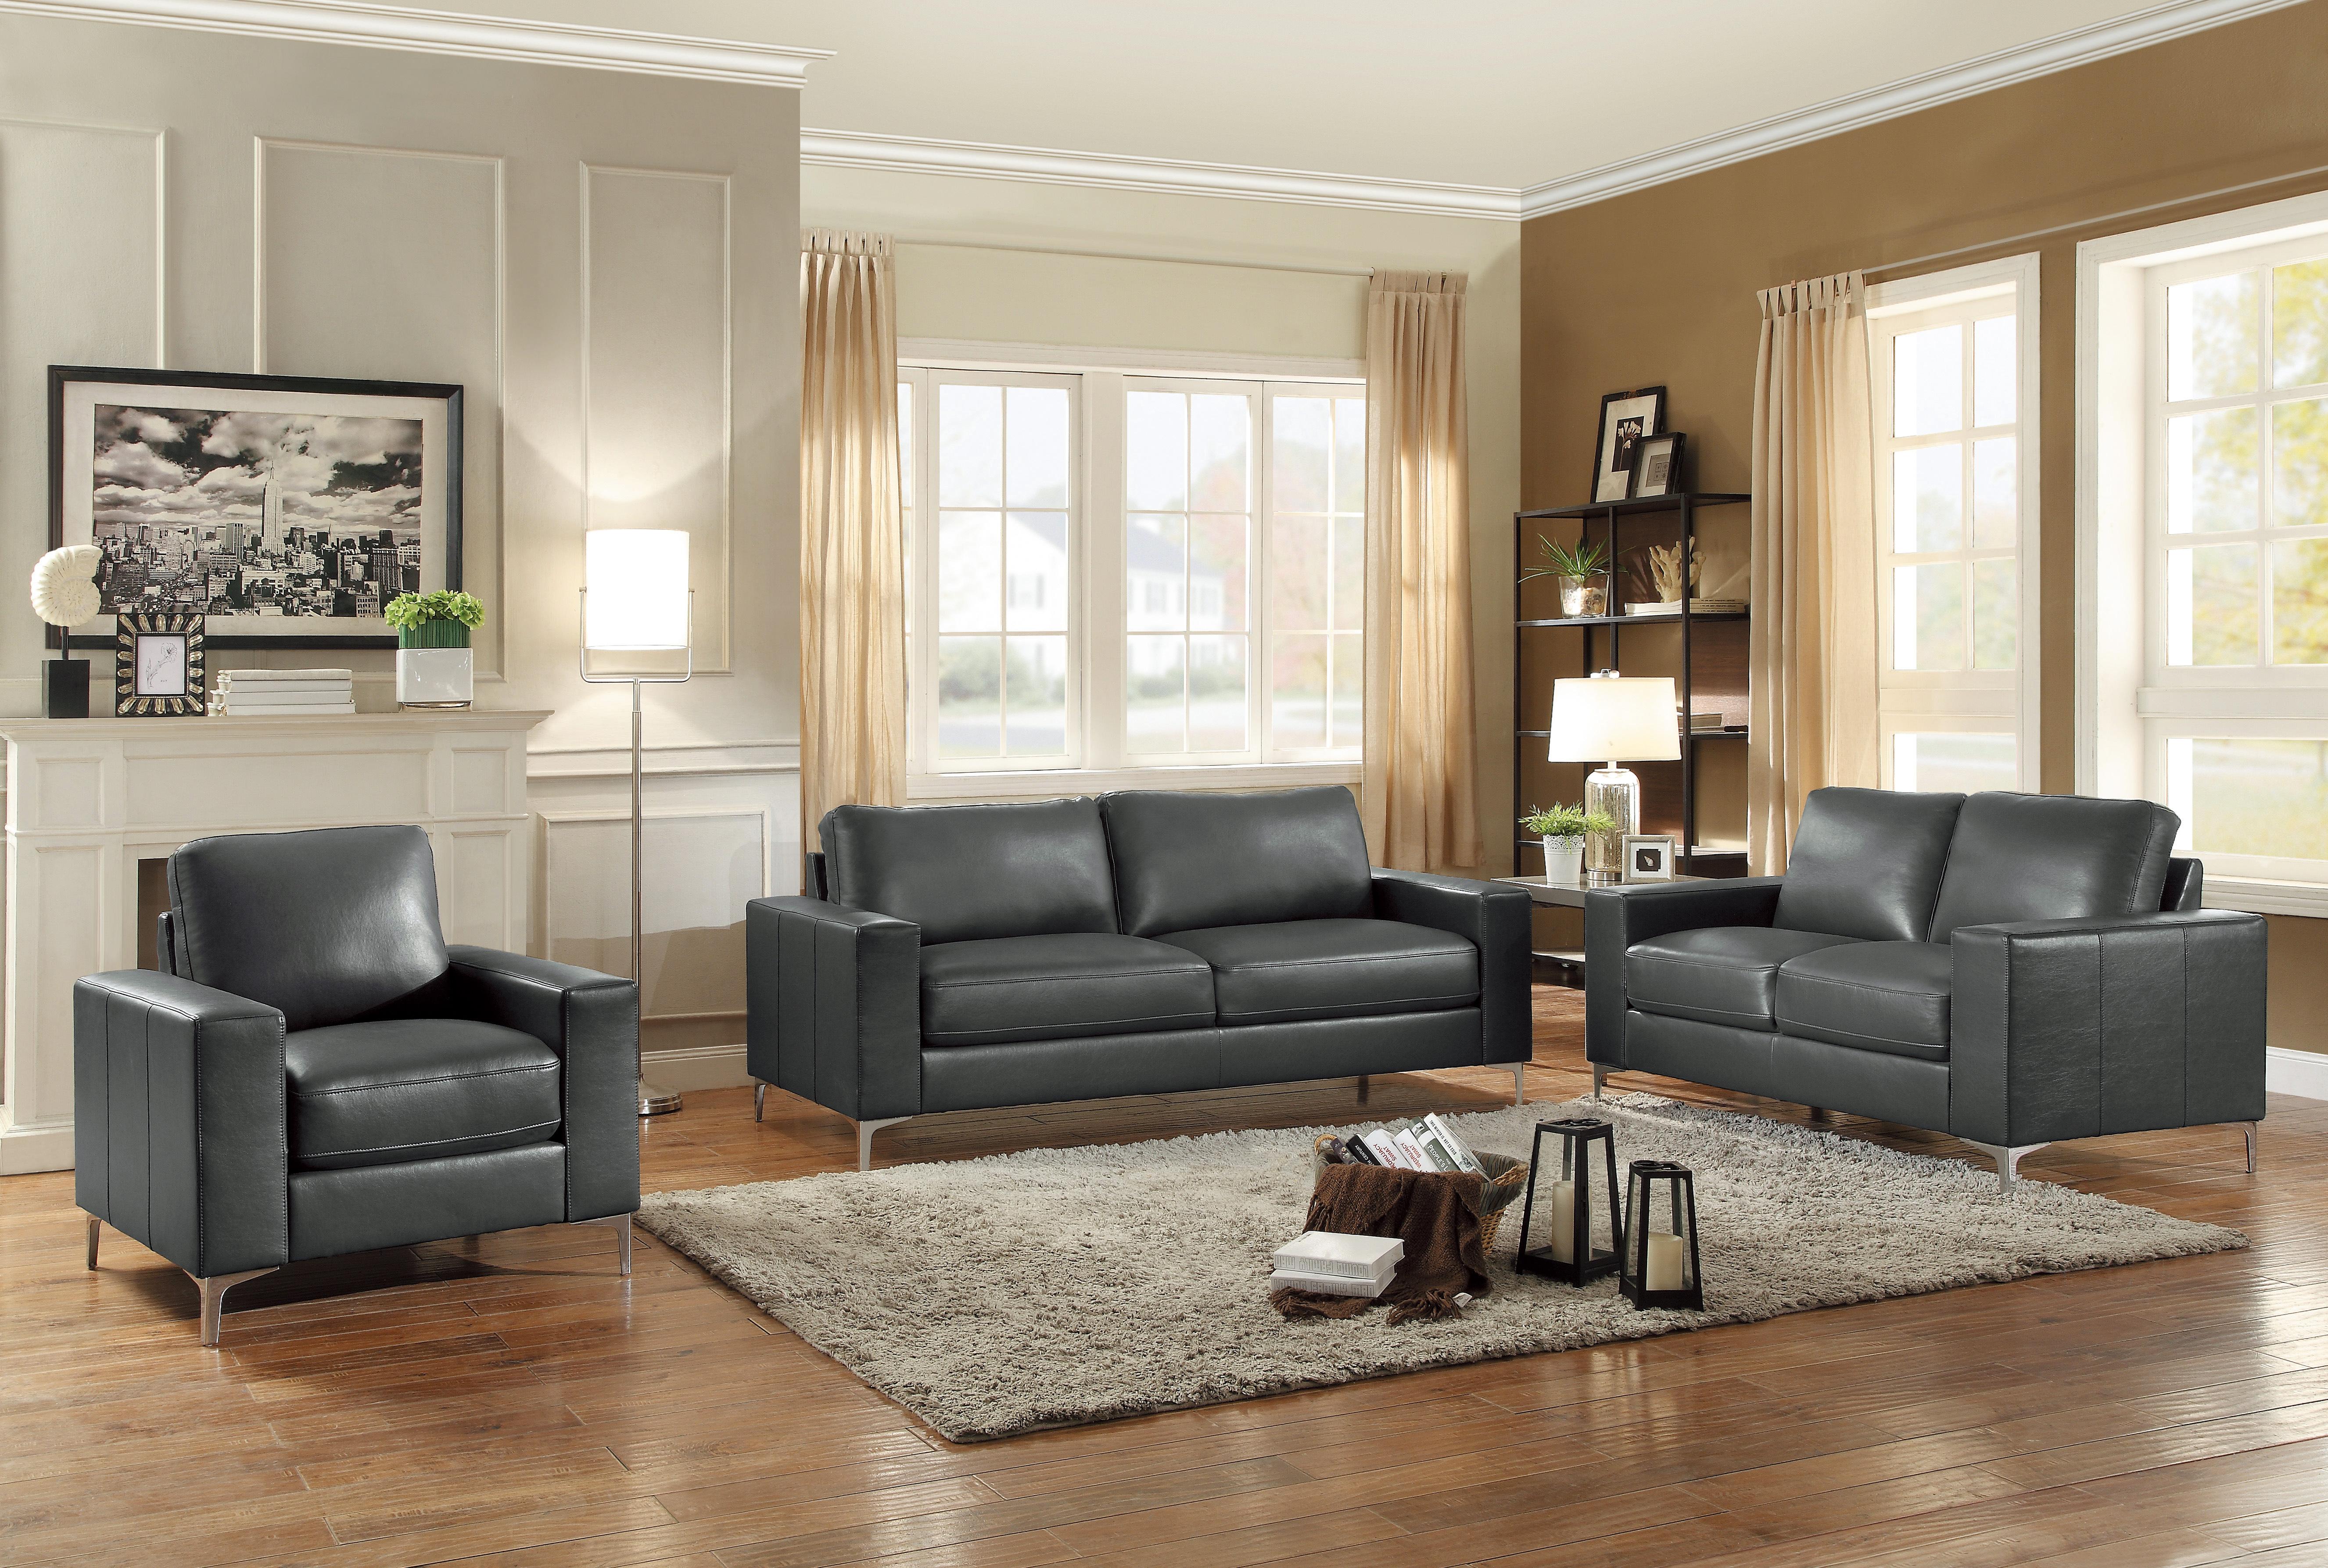 Contemporary Living Room Set 8203GY-3PC Iniko 8203GY-3PC in Gray Faux Leather